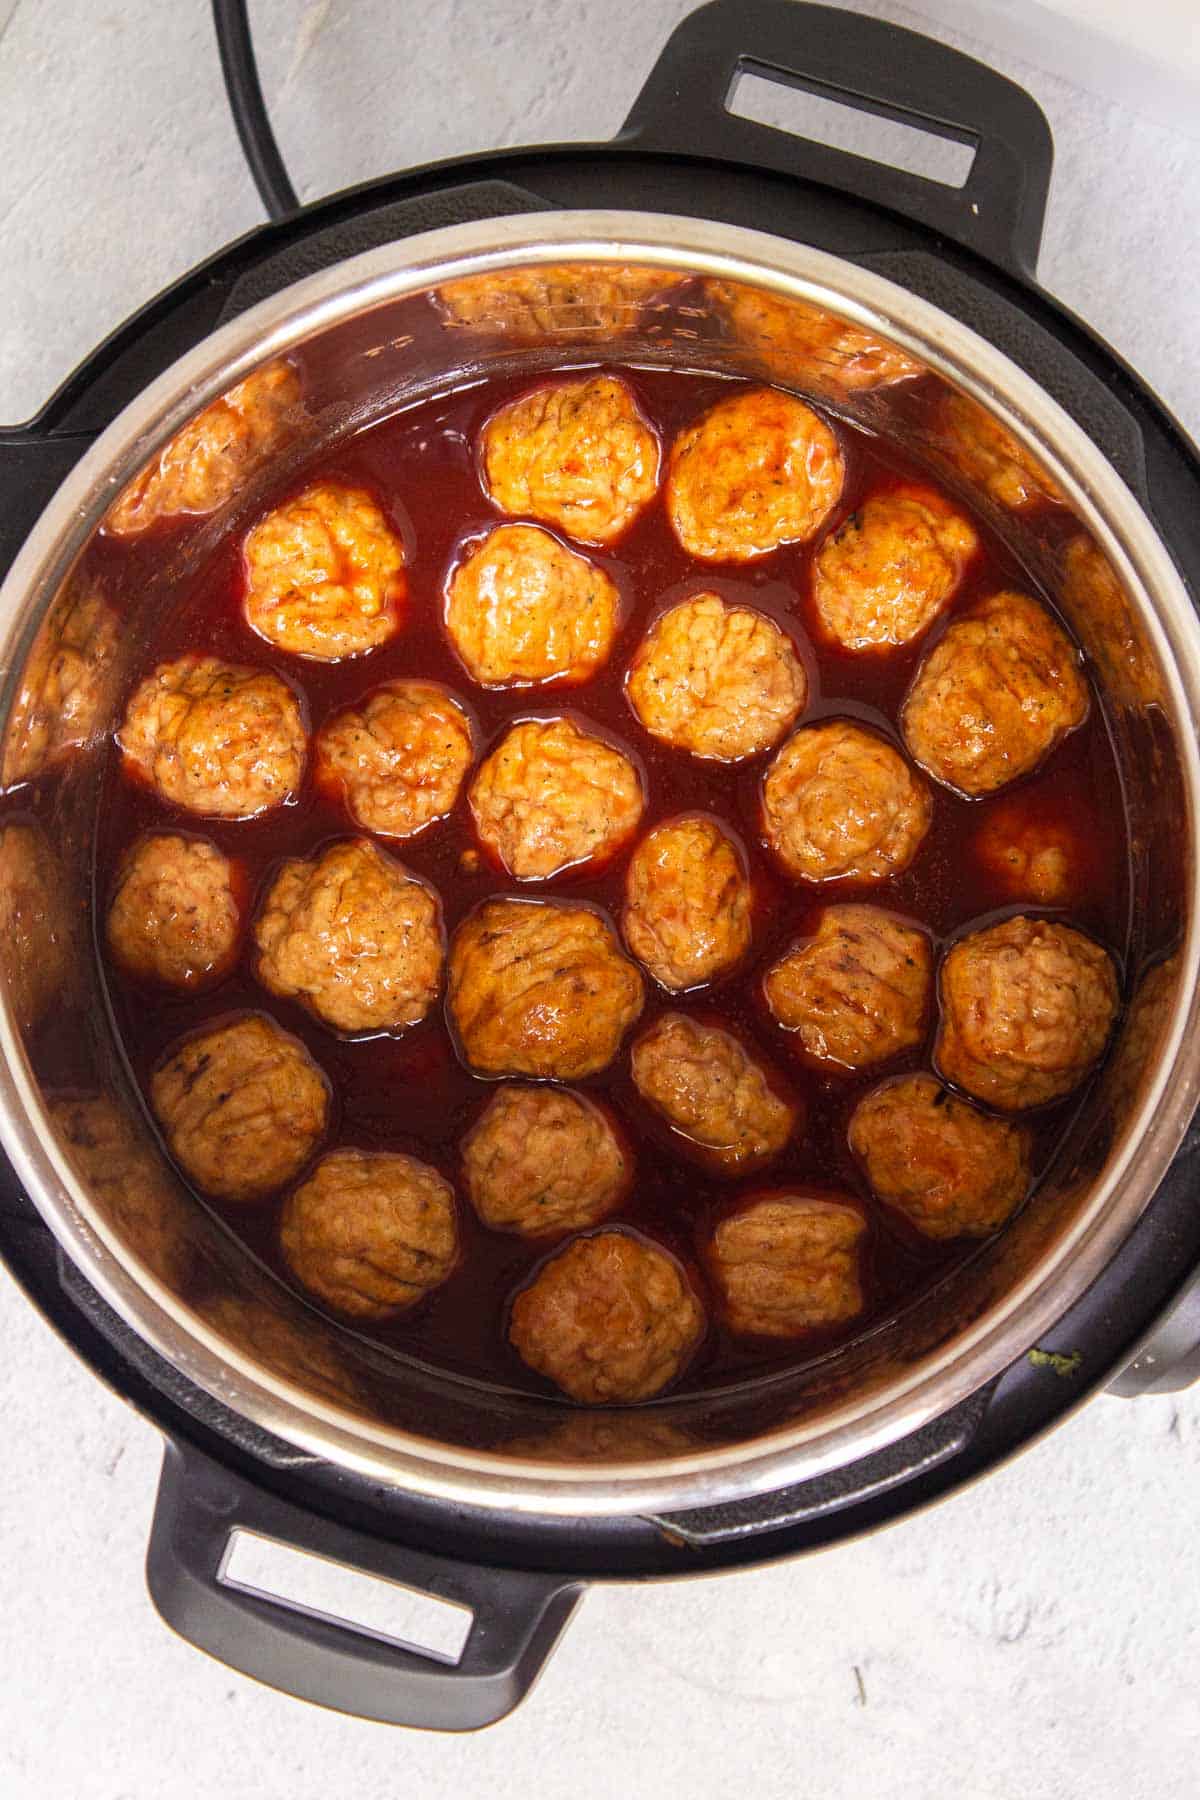 Frozen meatballs in the Instant Pot coated in grape jelly sauce